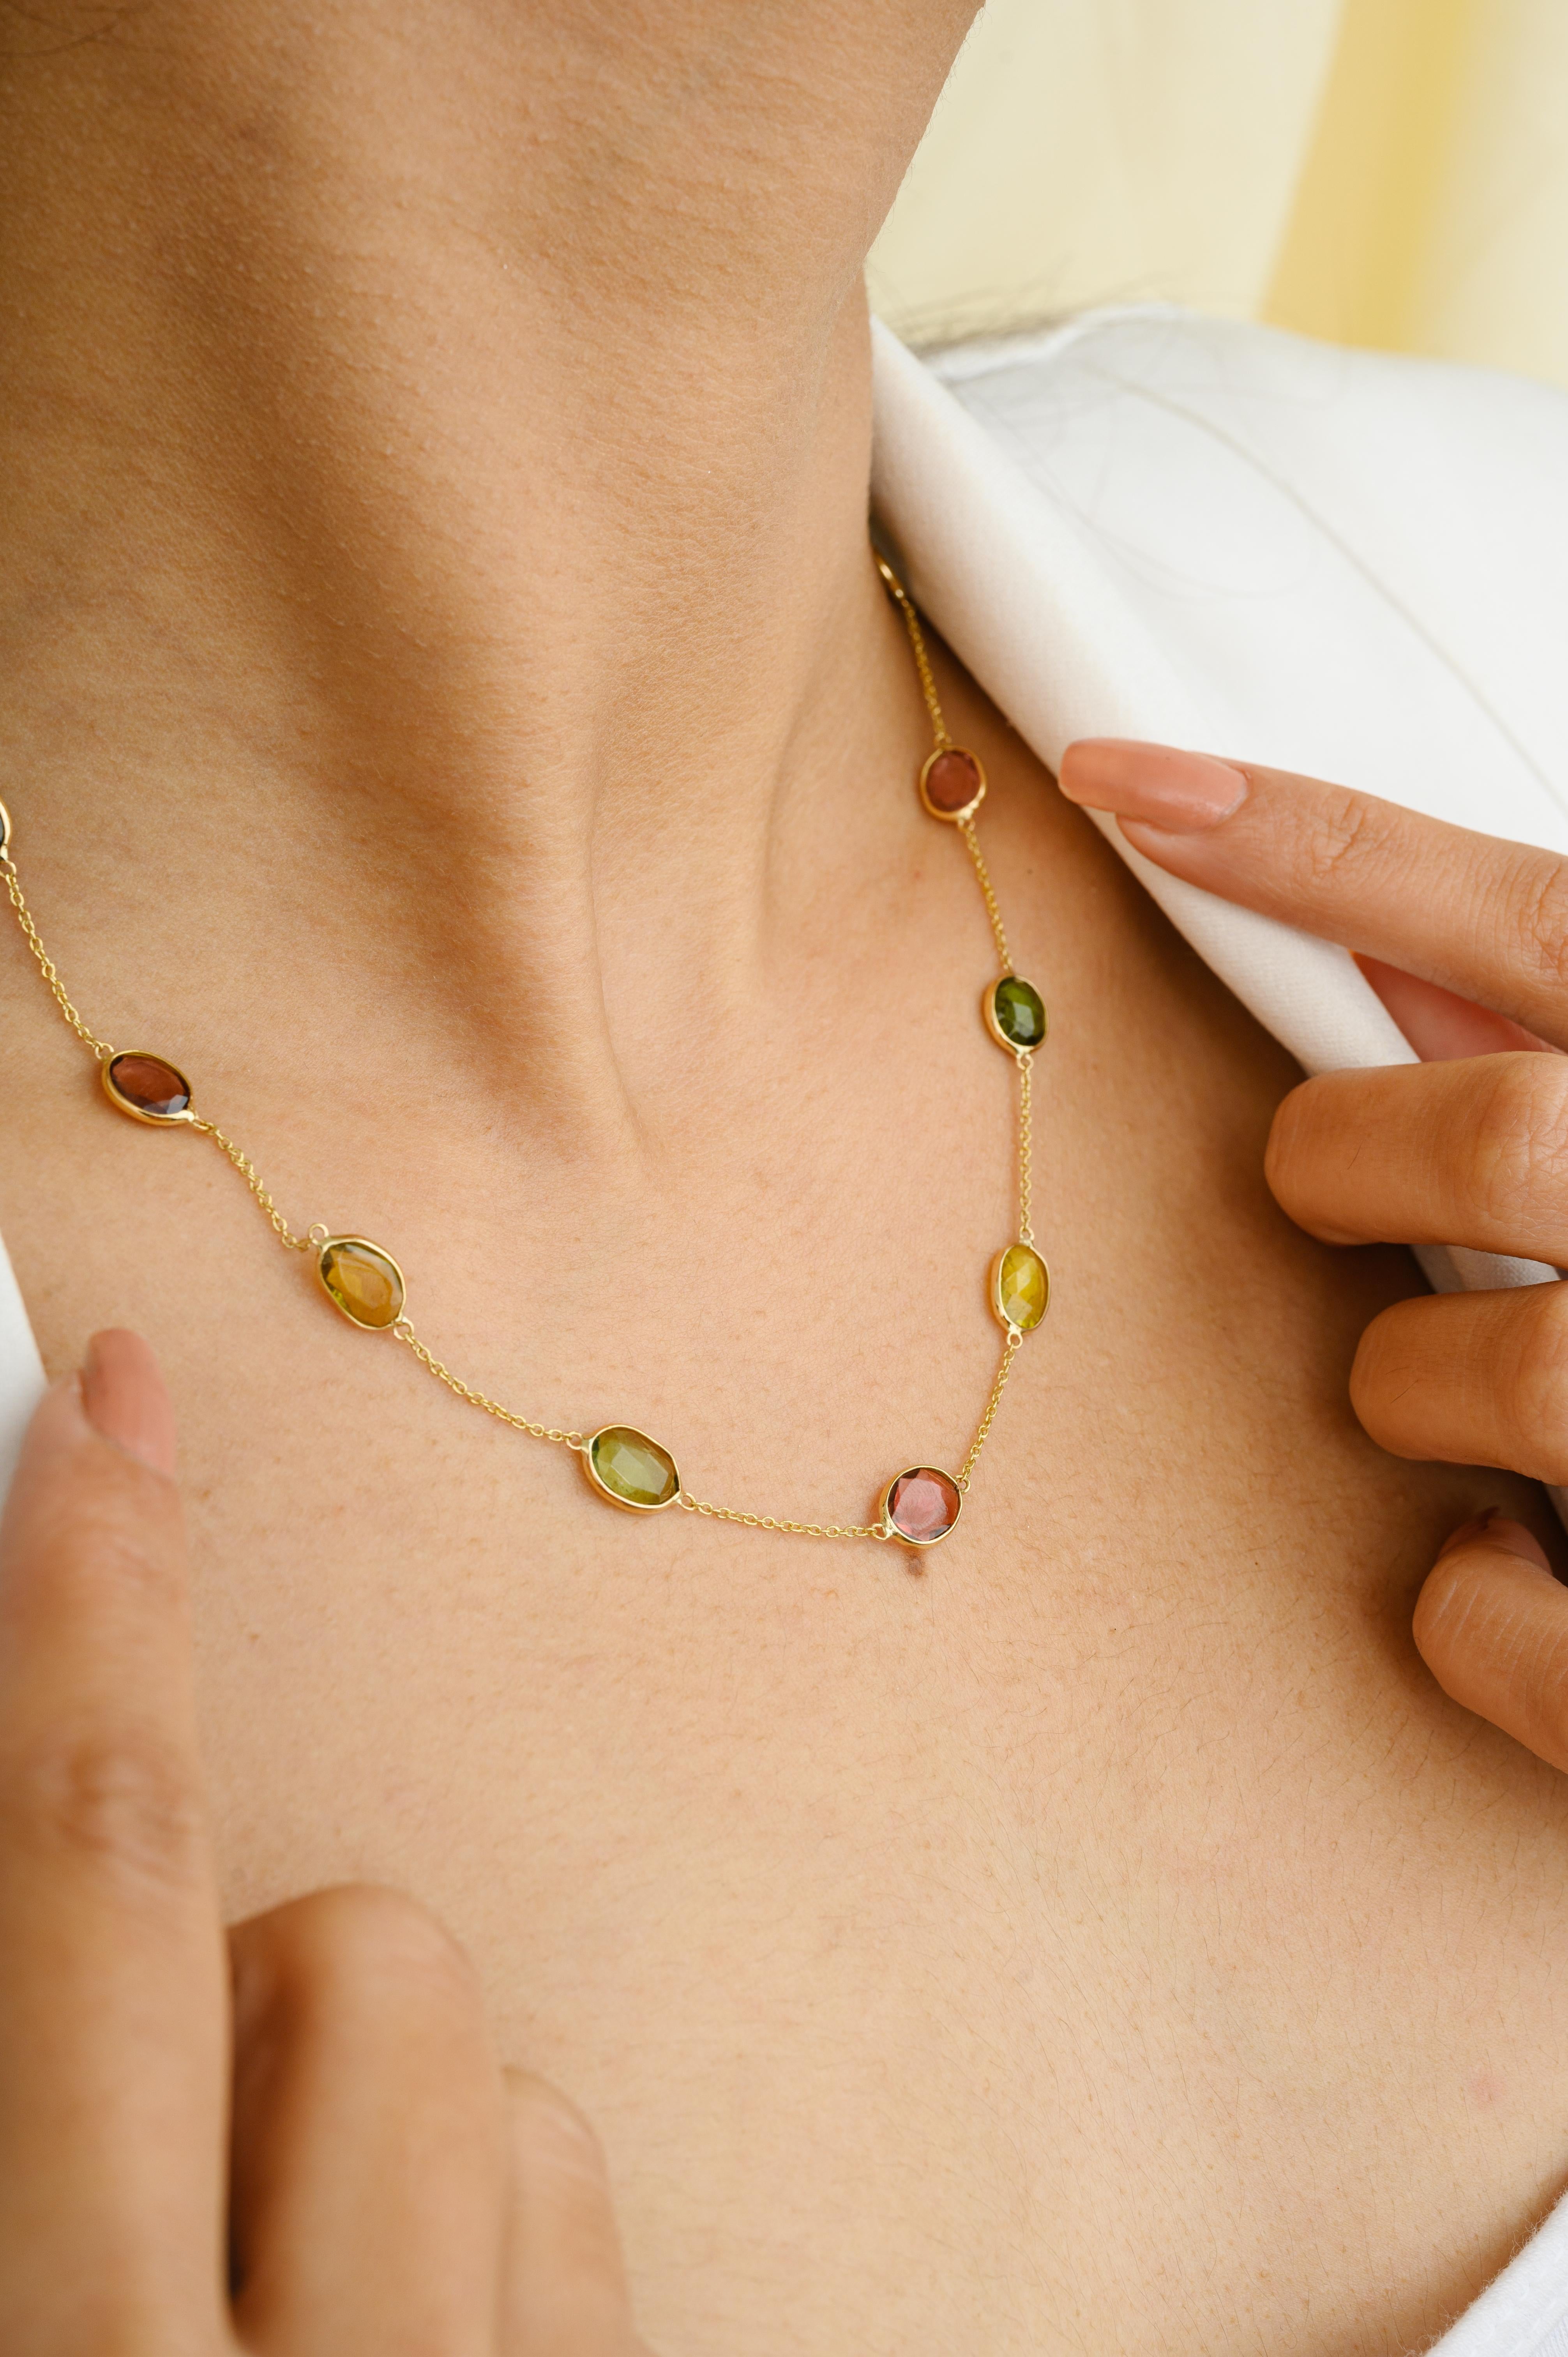 8.25 Carat Natural Tourmaline Station Chain Necklace in 18K Gold studded with uneven cut tourmaline. This stunning piece of jewelry instantly elevates a casual look or dressy outfit. 
Tourmaline creates a shield and prevents negative energies from